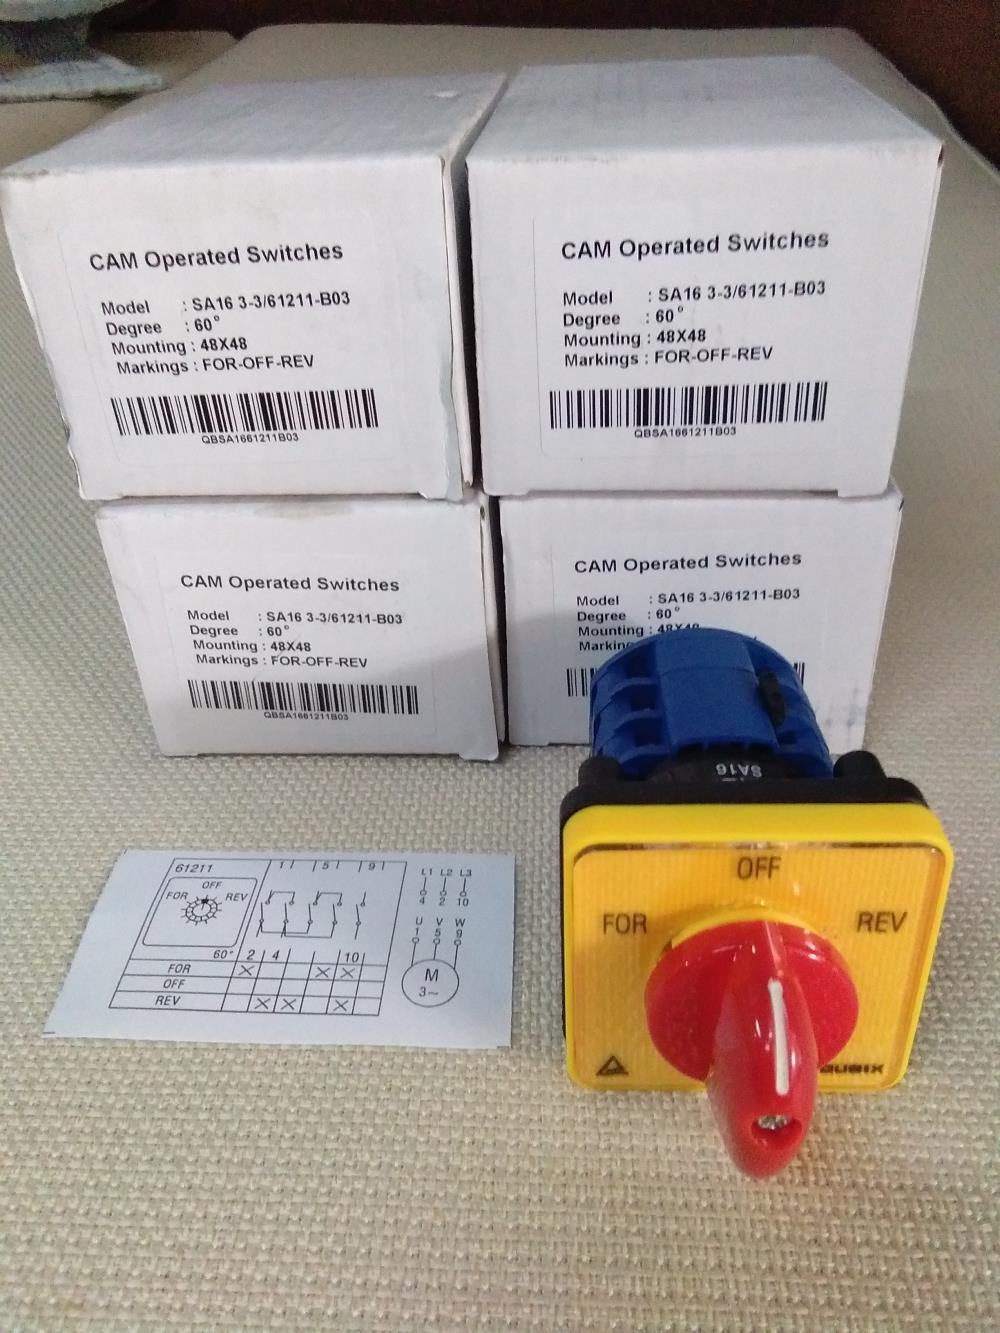 QUBIX : CAM SWITCH : FOR-OFF-REV 16A 3P กลับทางหมุน ,นครราชสีมา QUBIX CAM SWITCH กลับทางหมุน 16A 3P โคราช,,Instruments and Controls/Switches